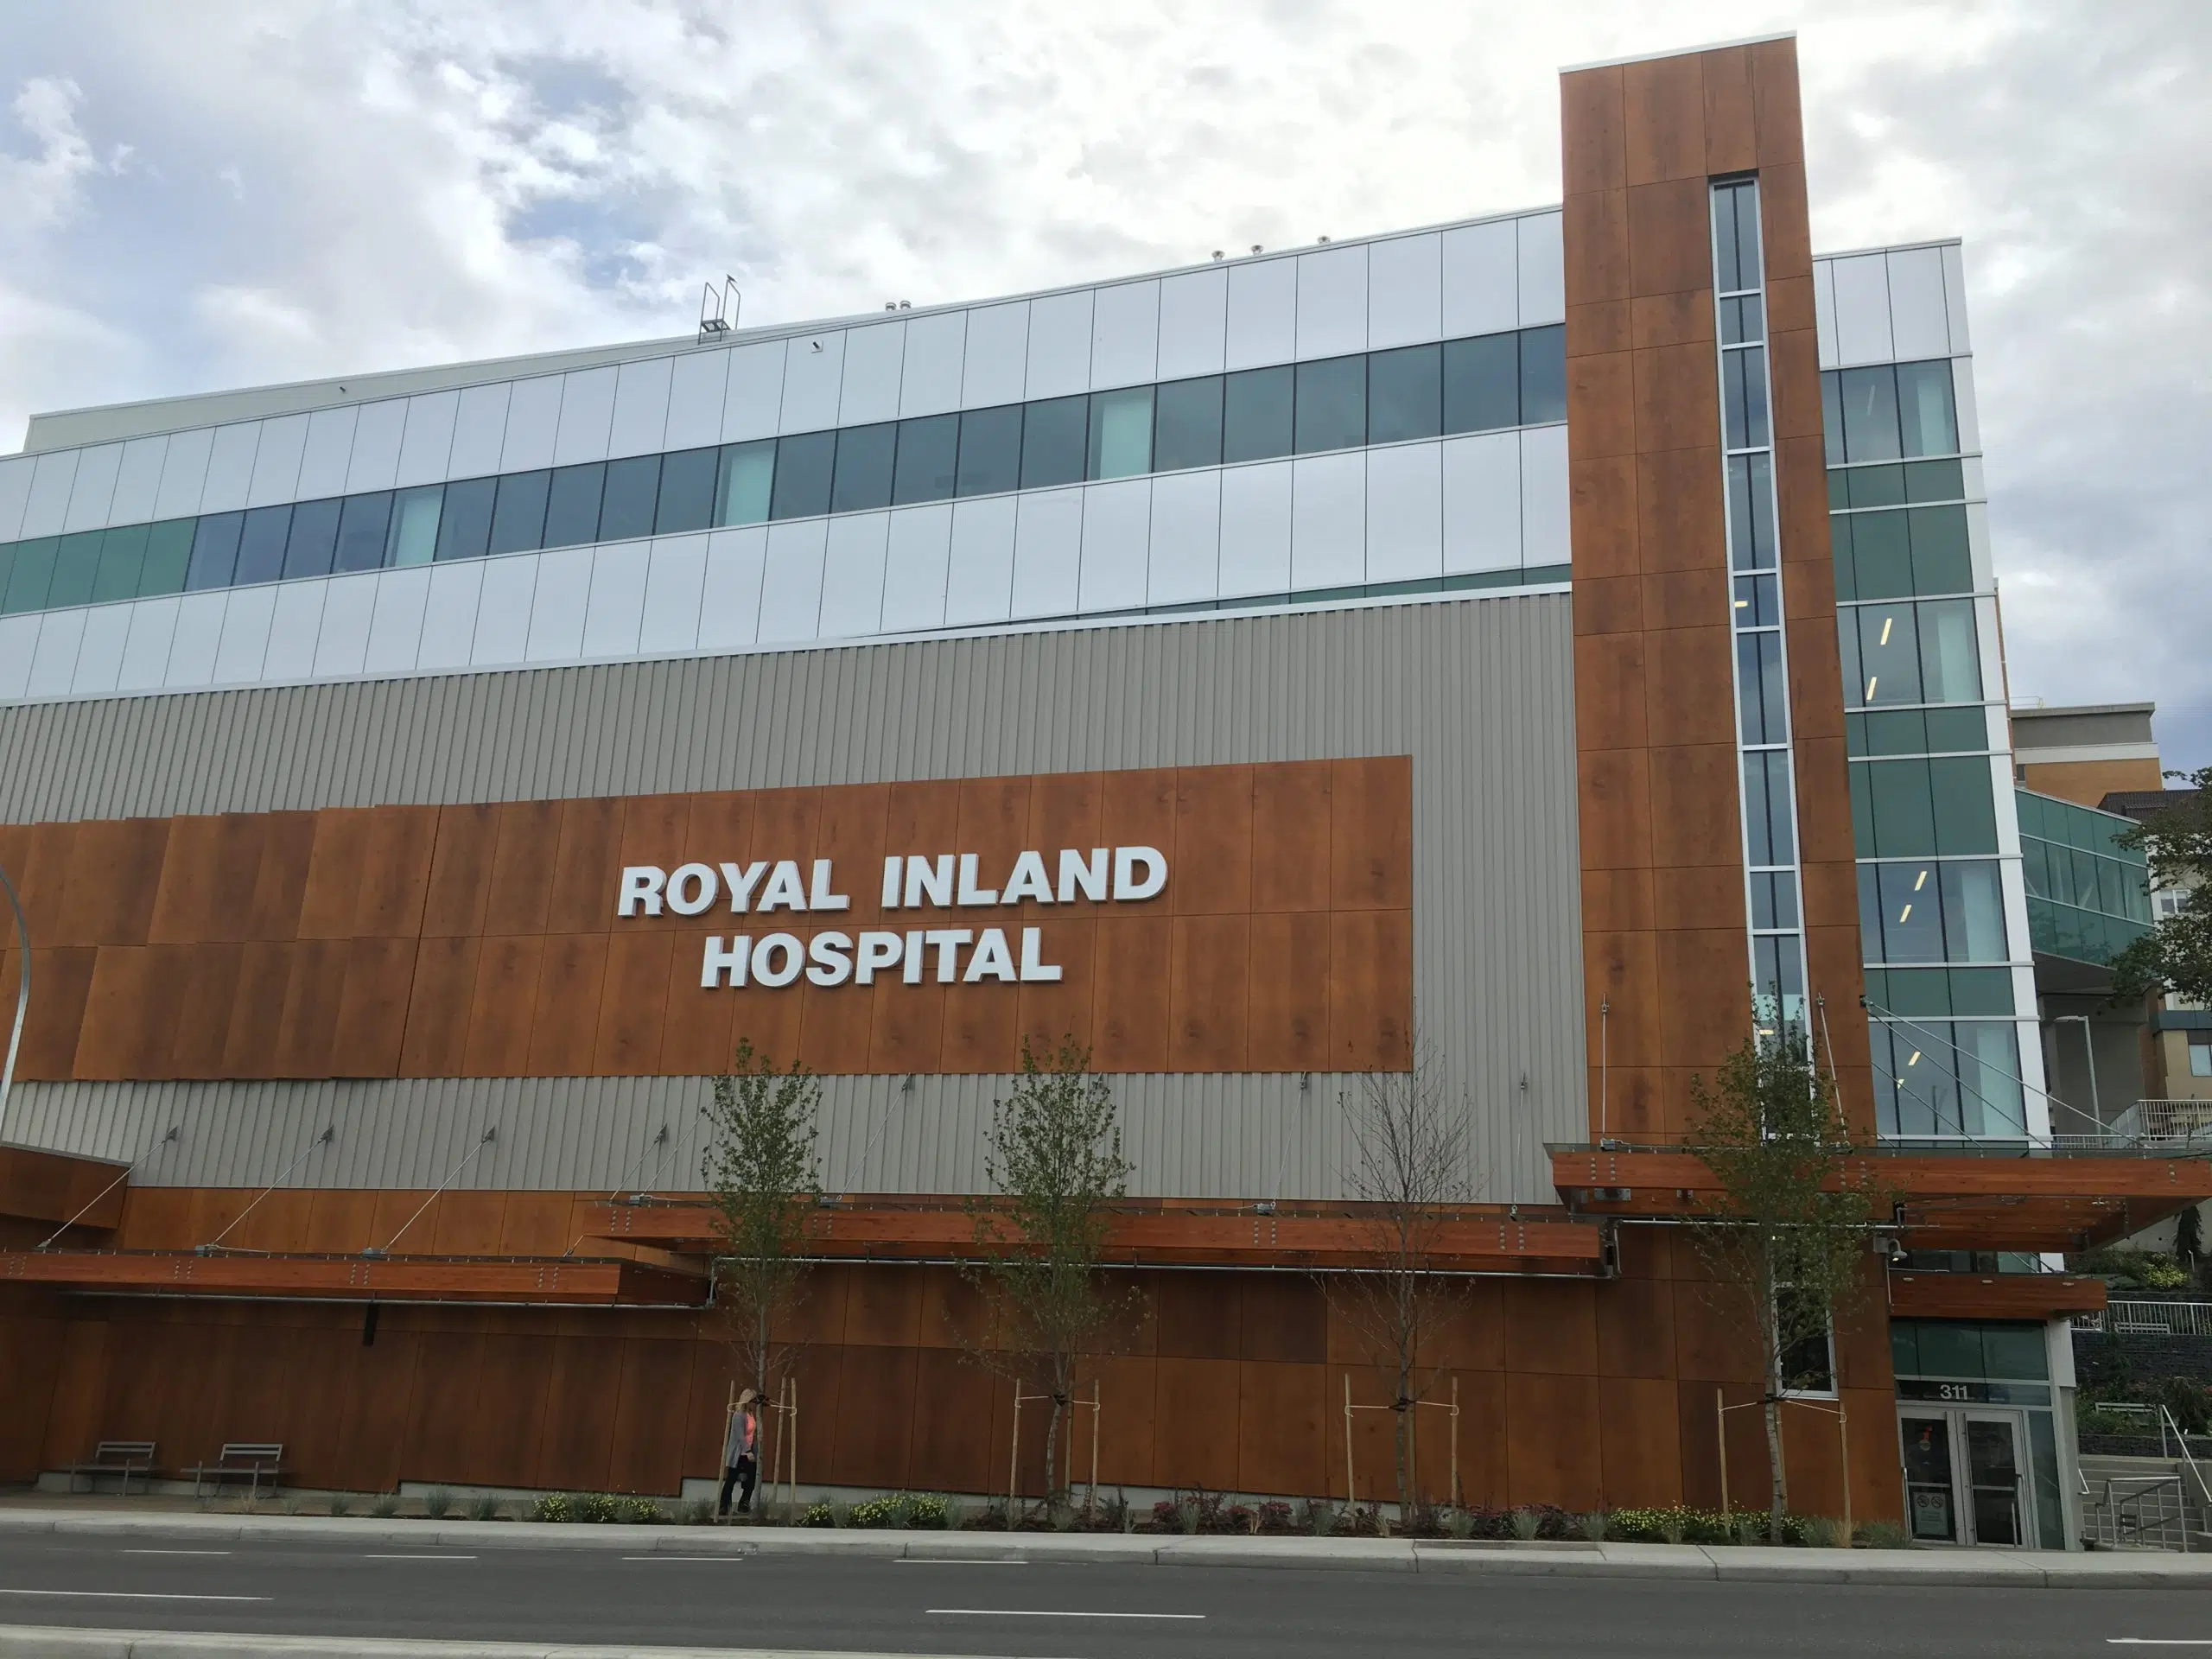 Royal Inland Hospital will be utilizing technology in new ways for rural patients